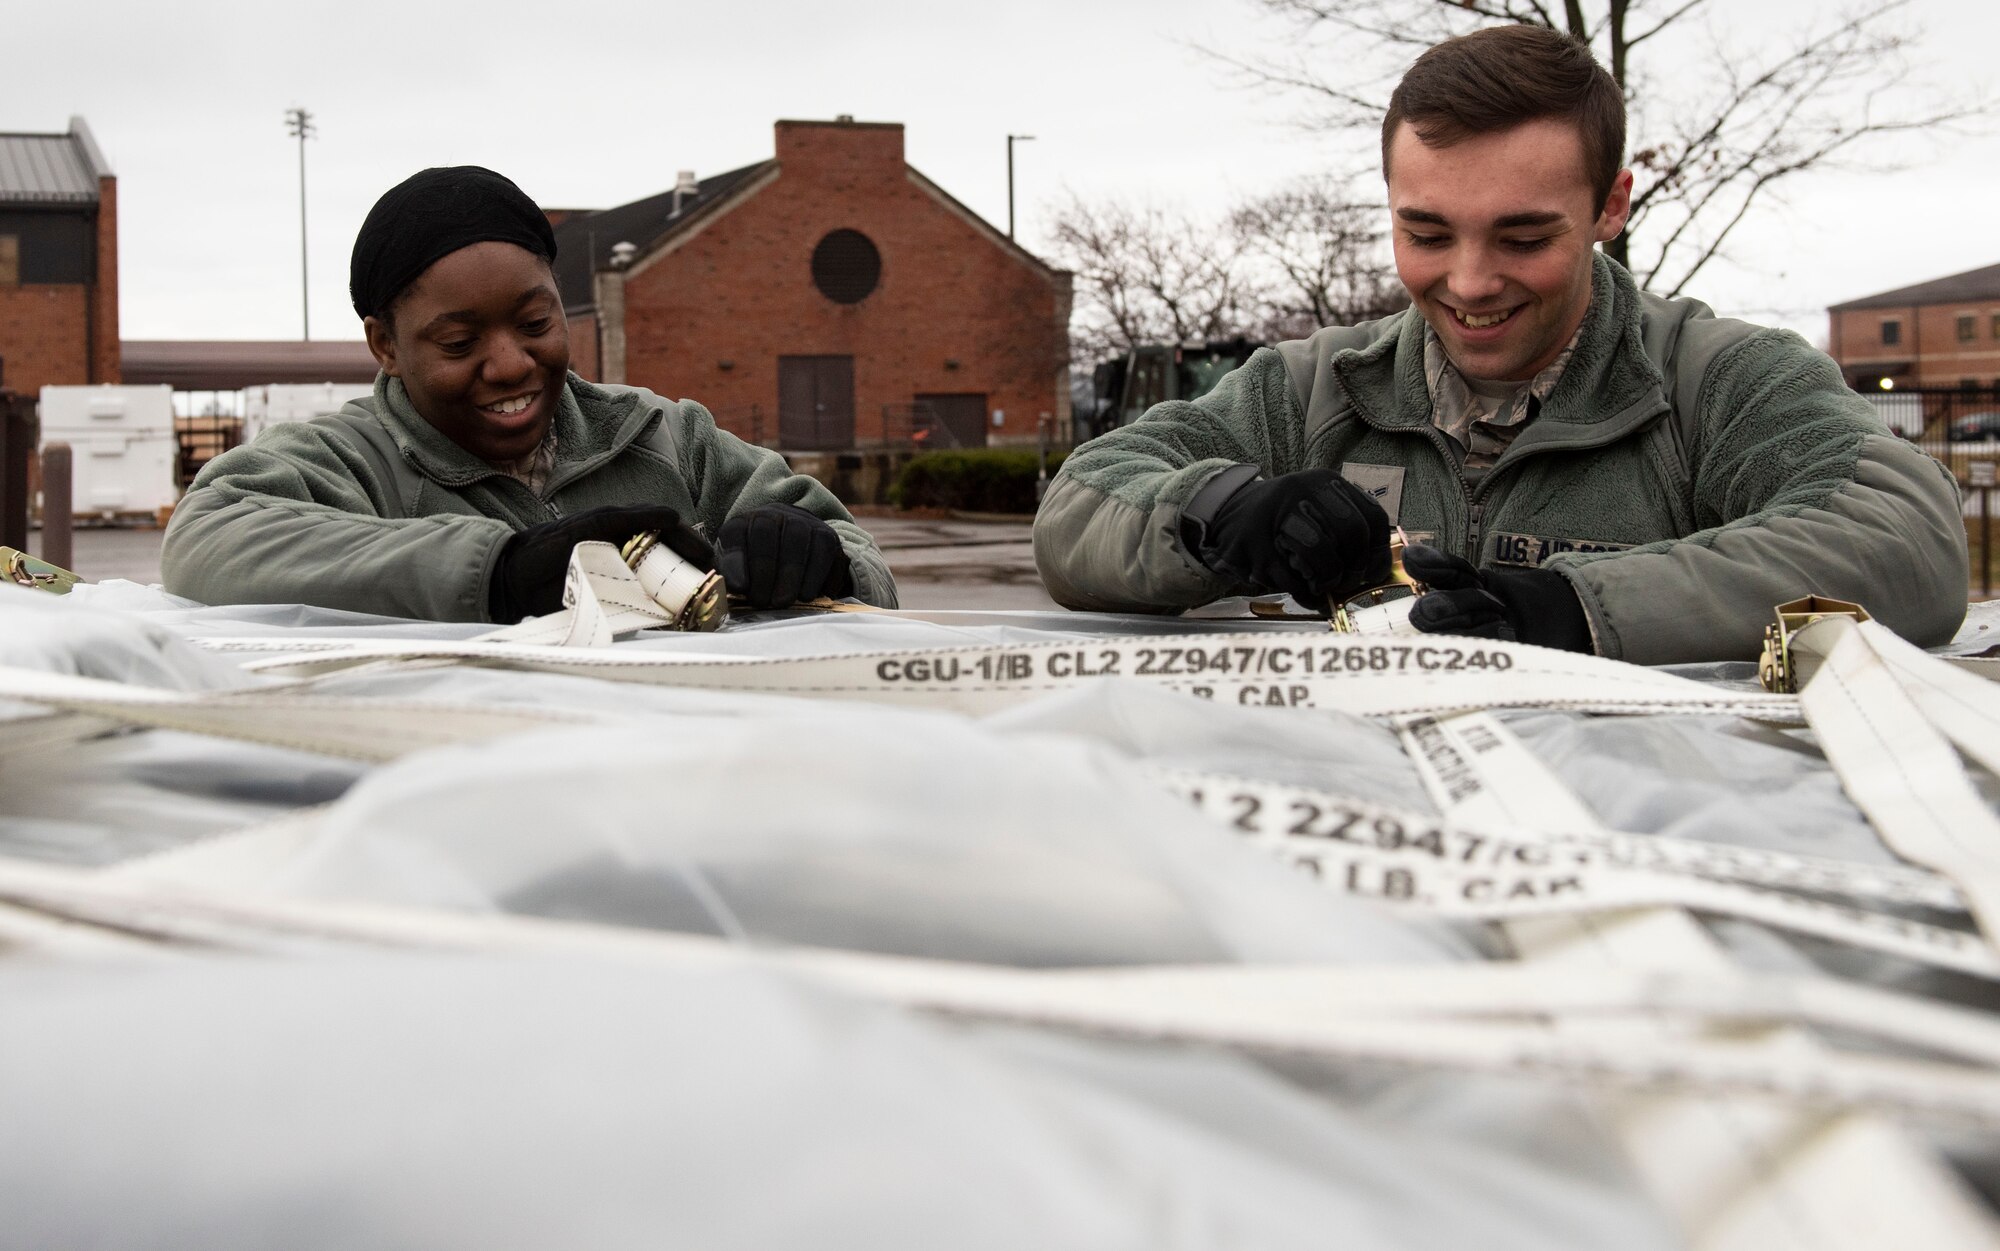 Senior Airman Dominique Lance and Airman 1st Class Brayden Bell , 375th Medical Support Squadron medical material technicians, adjust the cargo straps on a pallet of medical supplies during a mobility exercise, Jan. 23, 2019, at Scott Air Force Base, Illinois. This stage of the exercise requires close coordination between the 375th MDSS and the 375th Logistics Readiness Squadron, whose air and ground transportation crews ensure the cargo is properly palletized for safe loading onto aircraft.